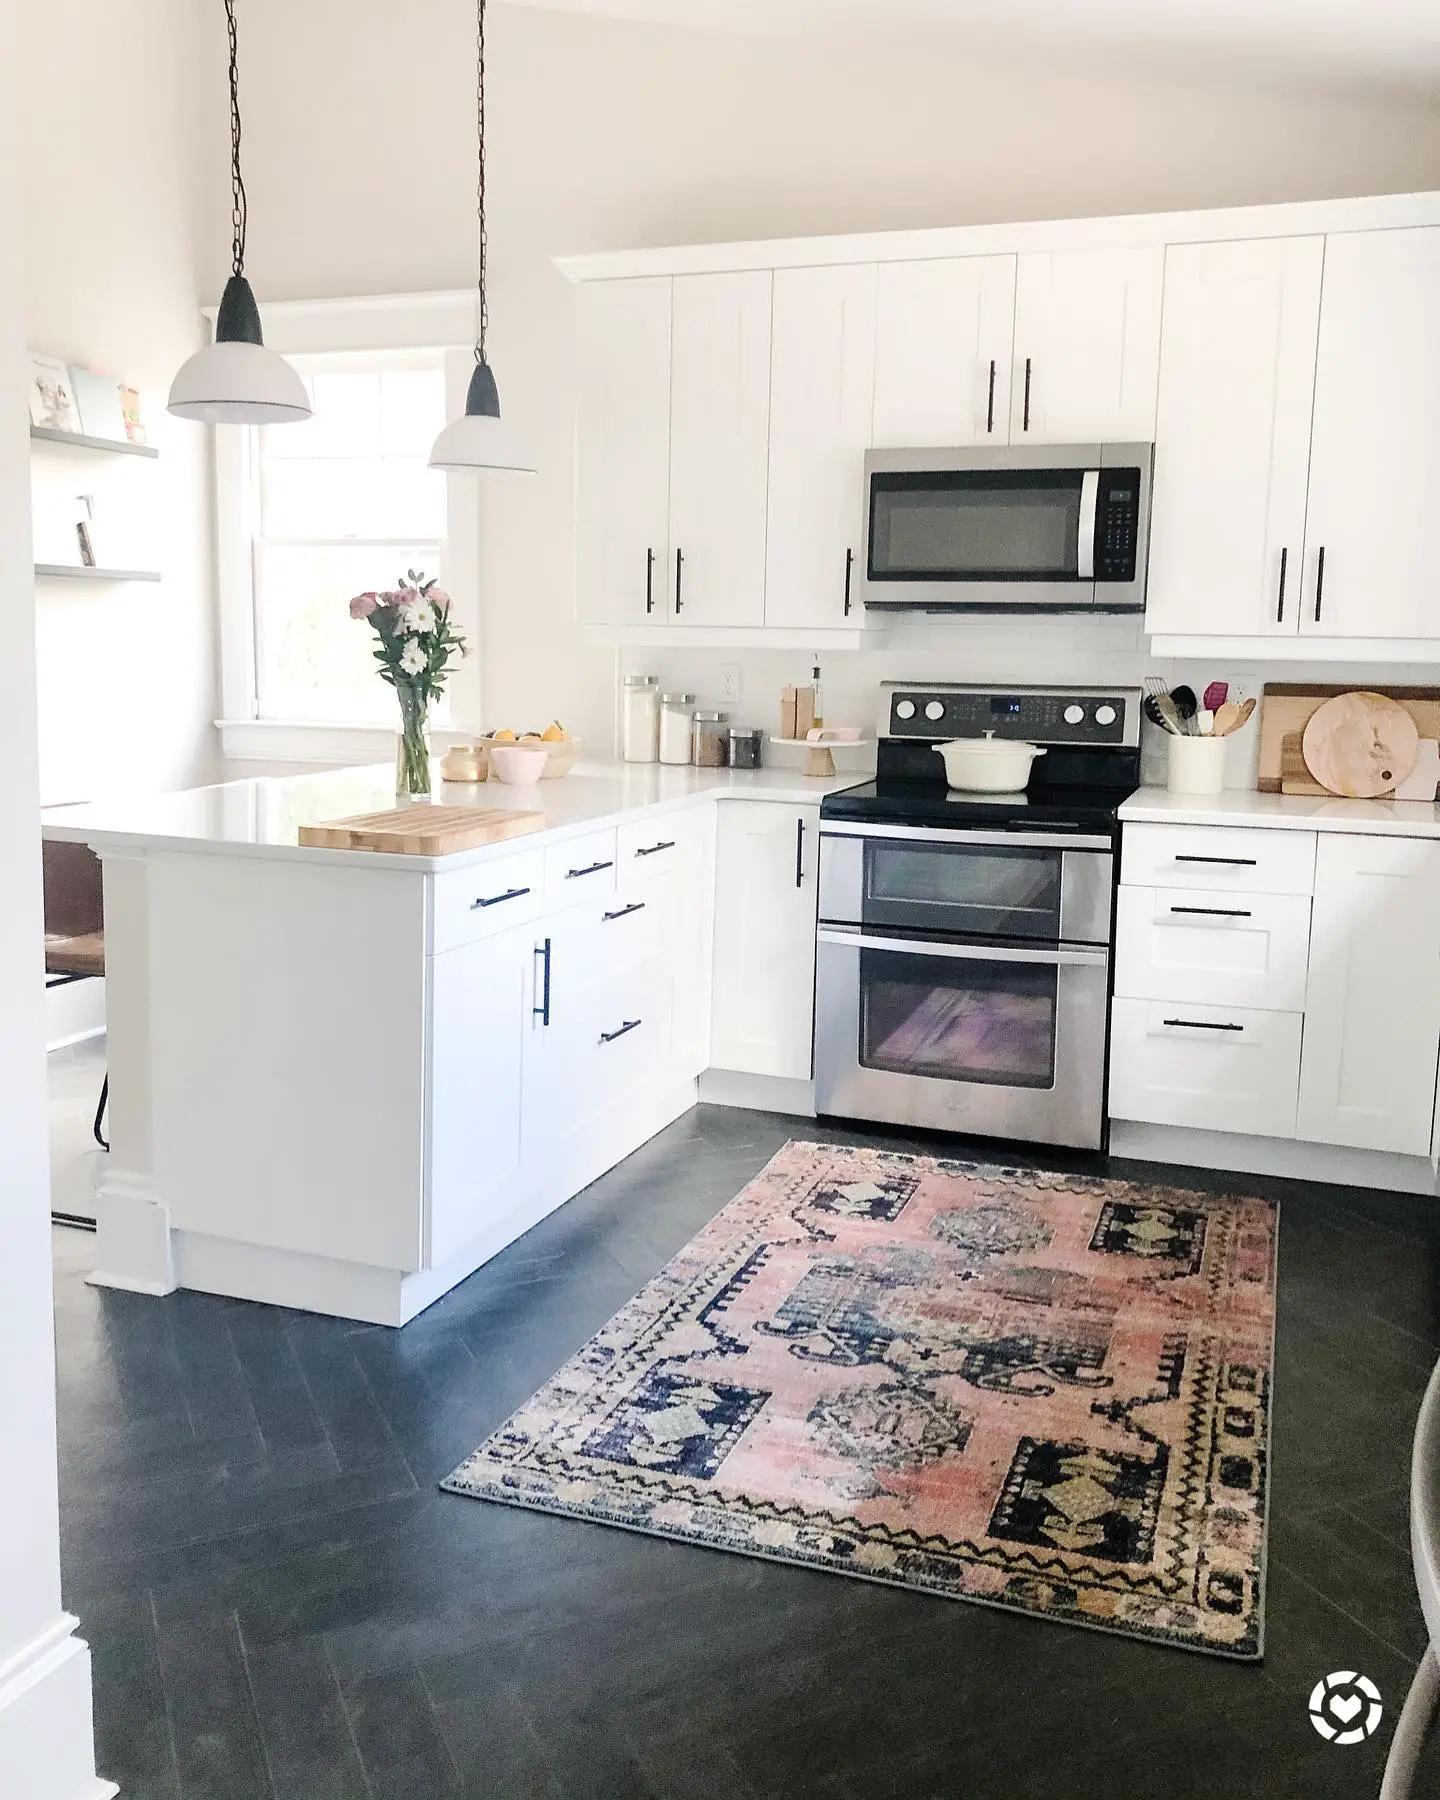 A kitchen with white cabinets and a rug on the floor. (Keywords: White Cabinets, Rug)